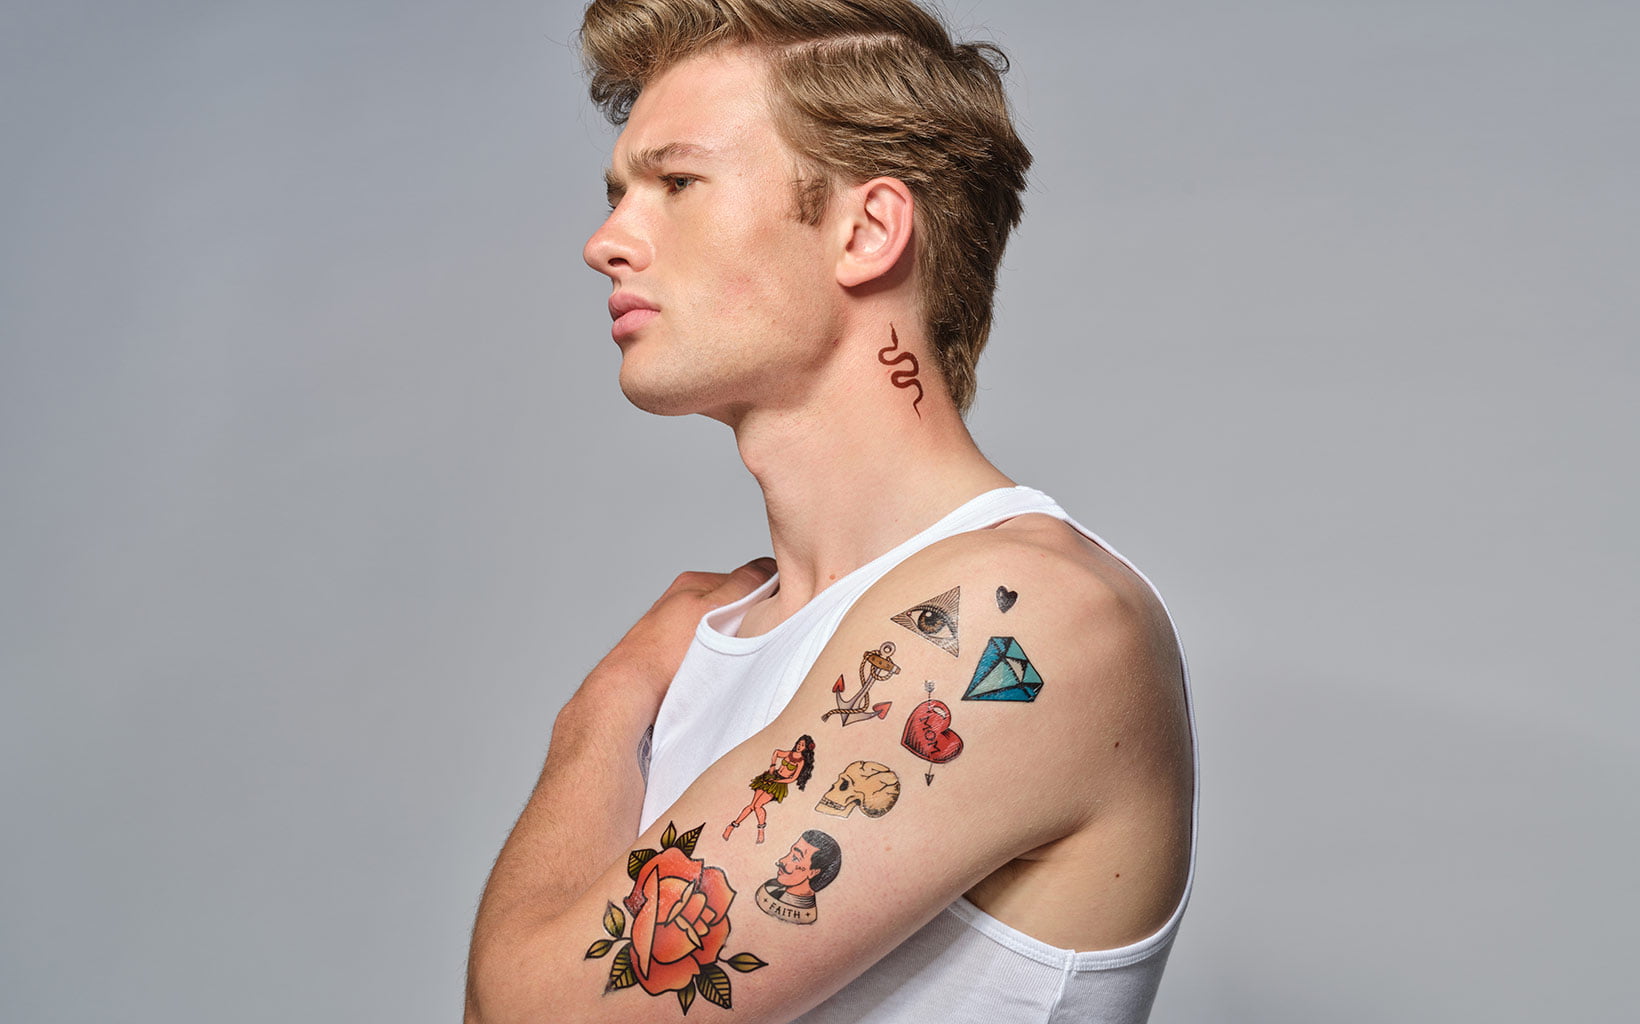 Amazoncom  Temporary Tattoos For Men Guys Boys  Teens  Fake Half Arm  Tattoos Sleeves For Arms Shoulders Chest Back Legs Cross Skull Owl Clock  Scorpion Rose Realistic Waterproof Transfers 8